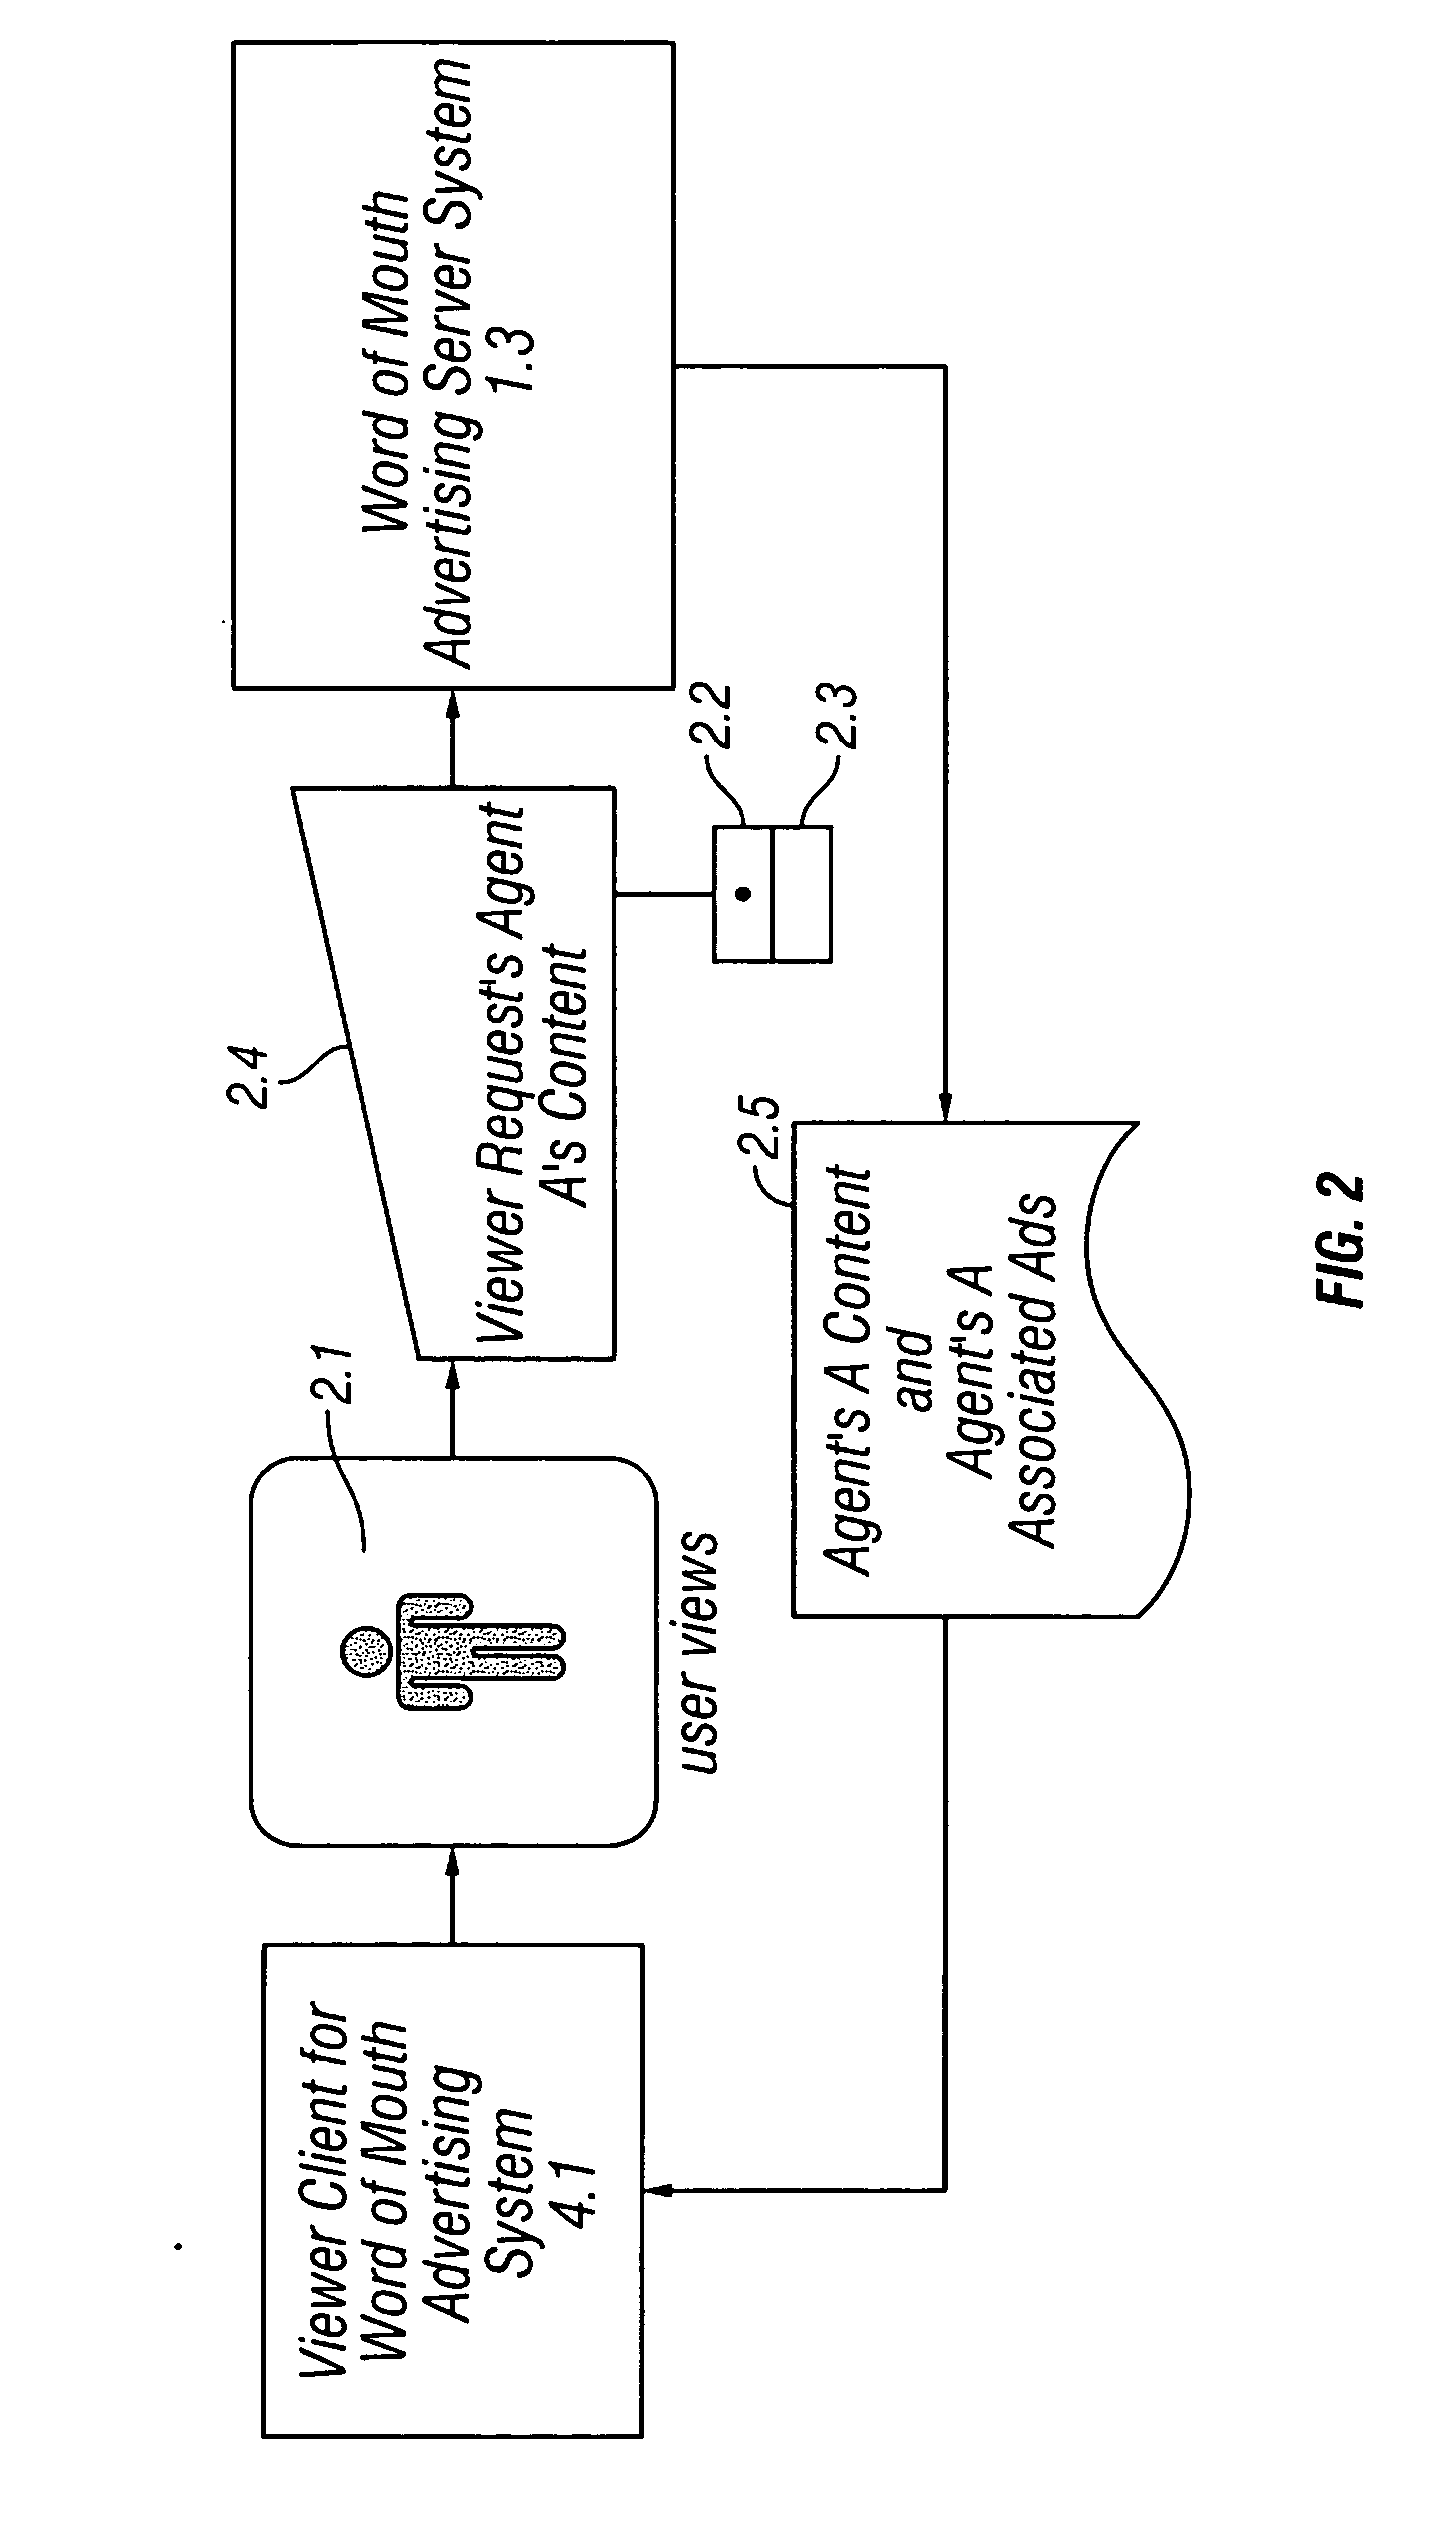 Method and system for word of mouth advertising via a communications network